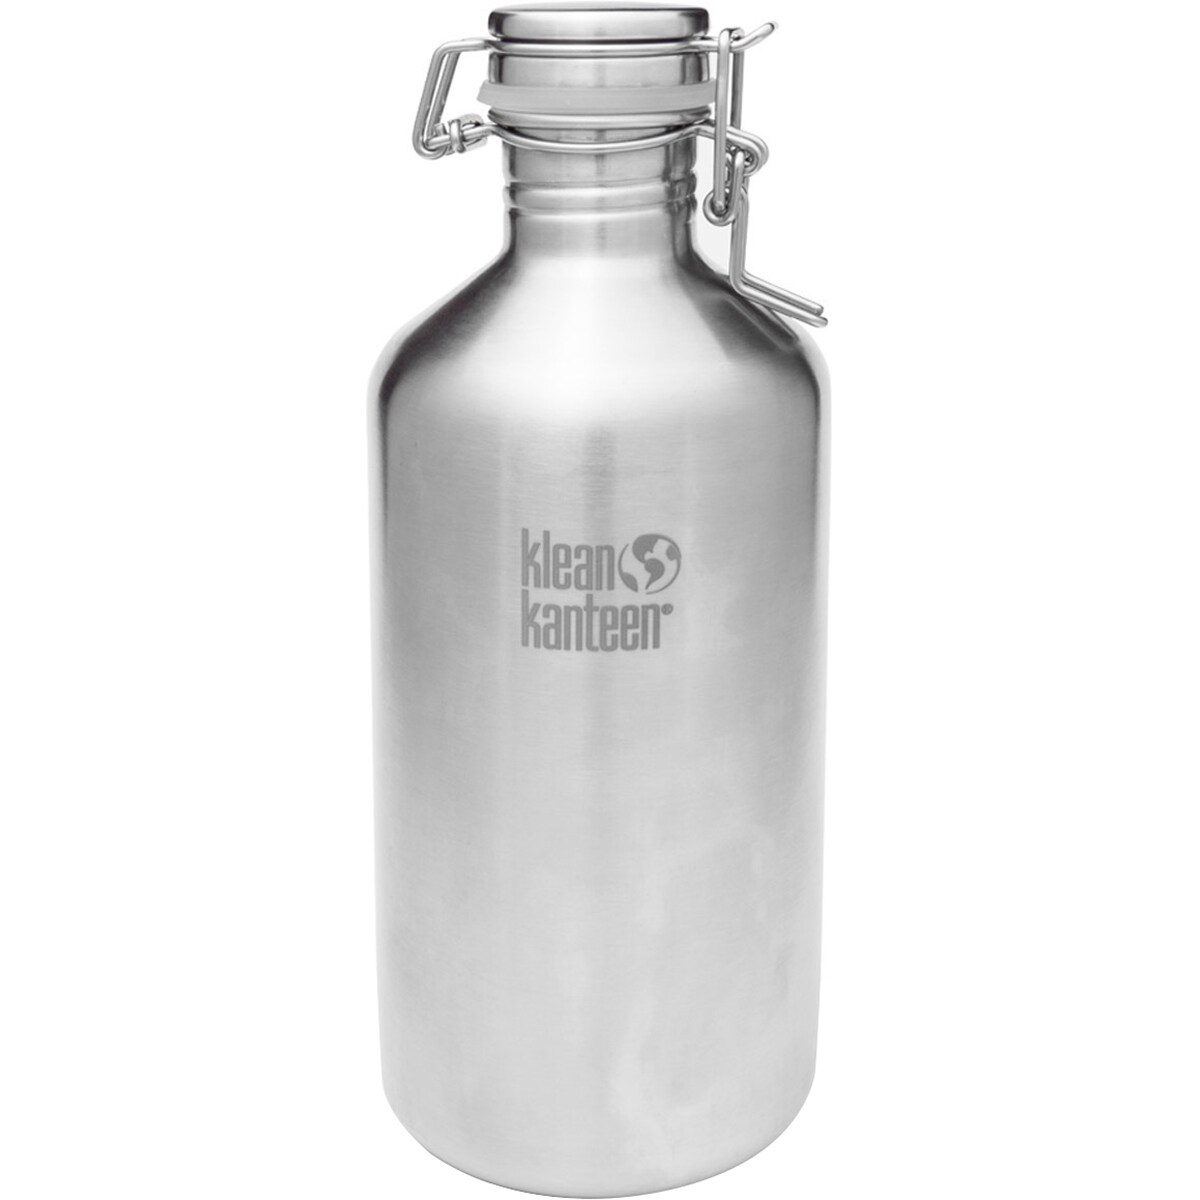 https://ak1.ostkcdn.com/images/products/is/images/direct/1ab3aeec67f9ad3b283b66a021e82a64e30885c1/Klean-Kanteen-Classic-64-oz.-Growler-with-Swing-Lok-Cap---Brush-Stainless.jpg